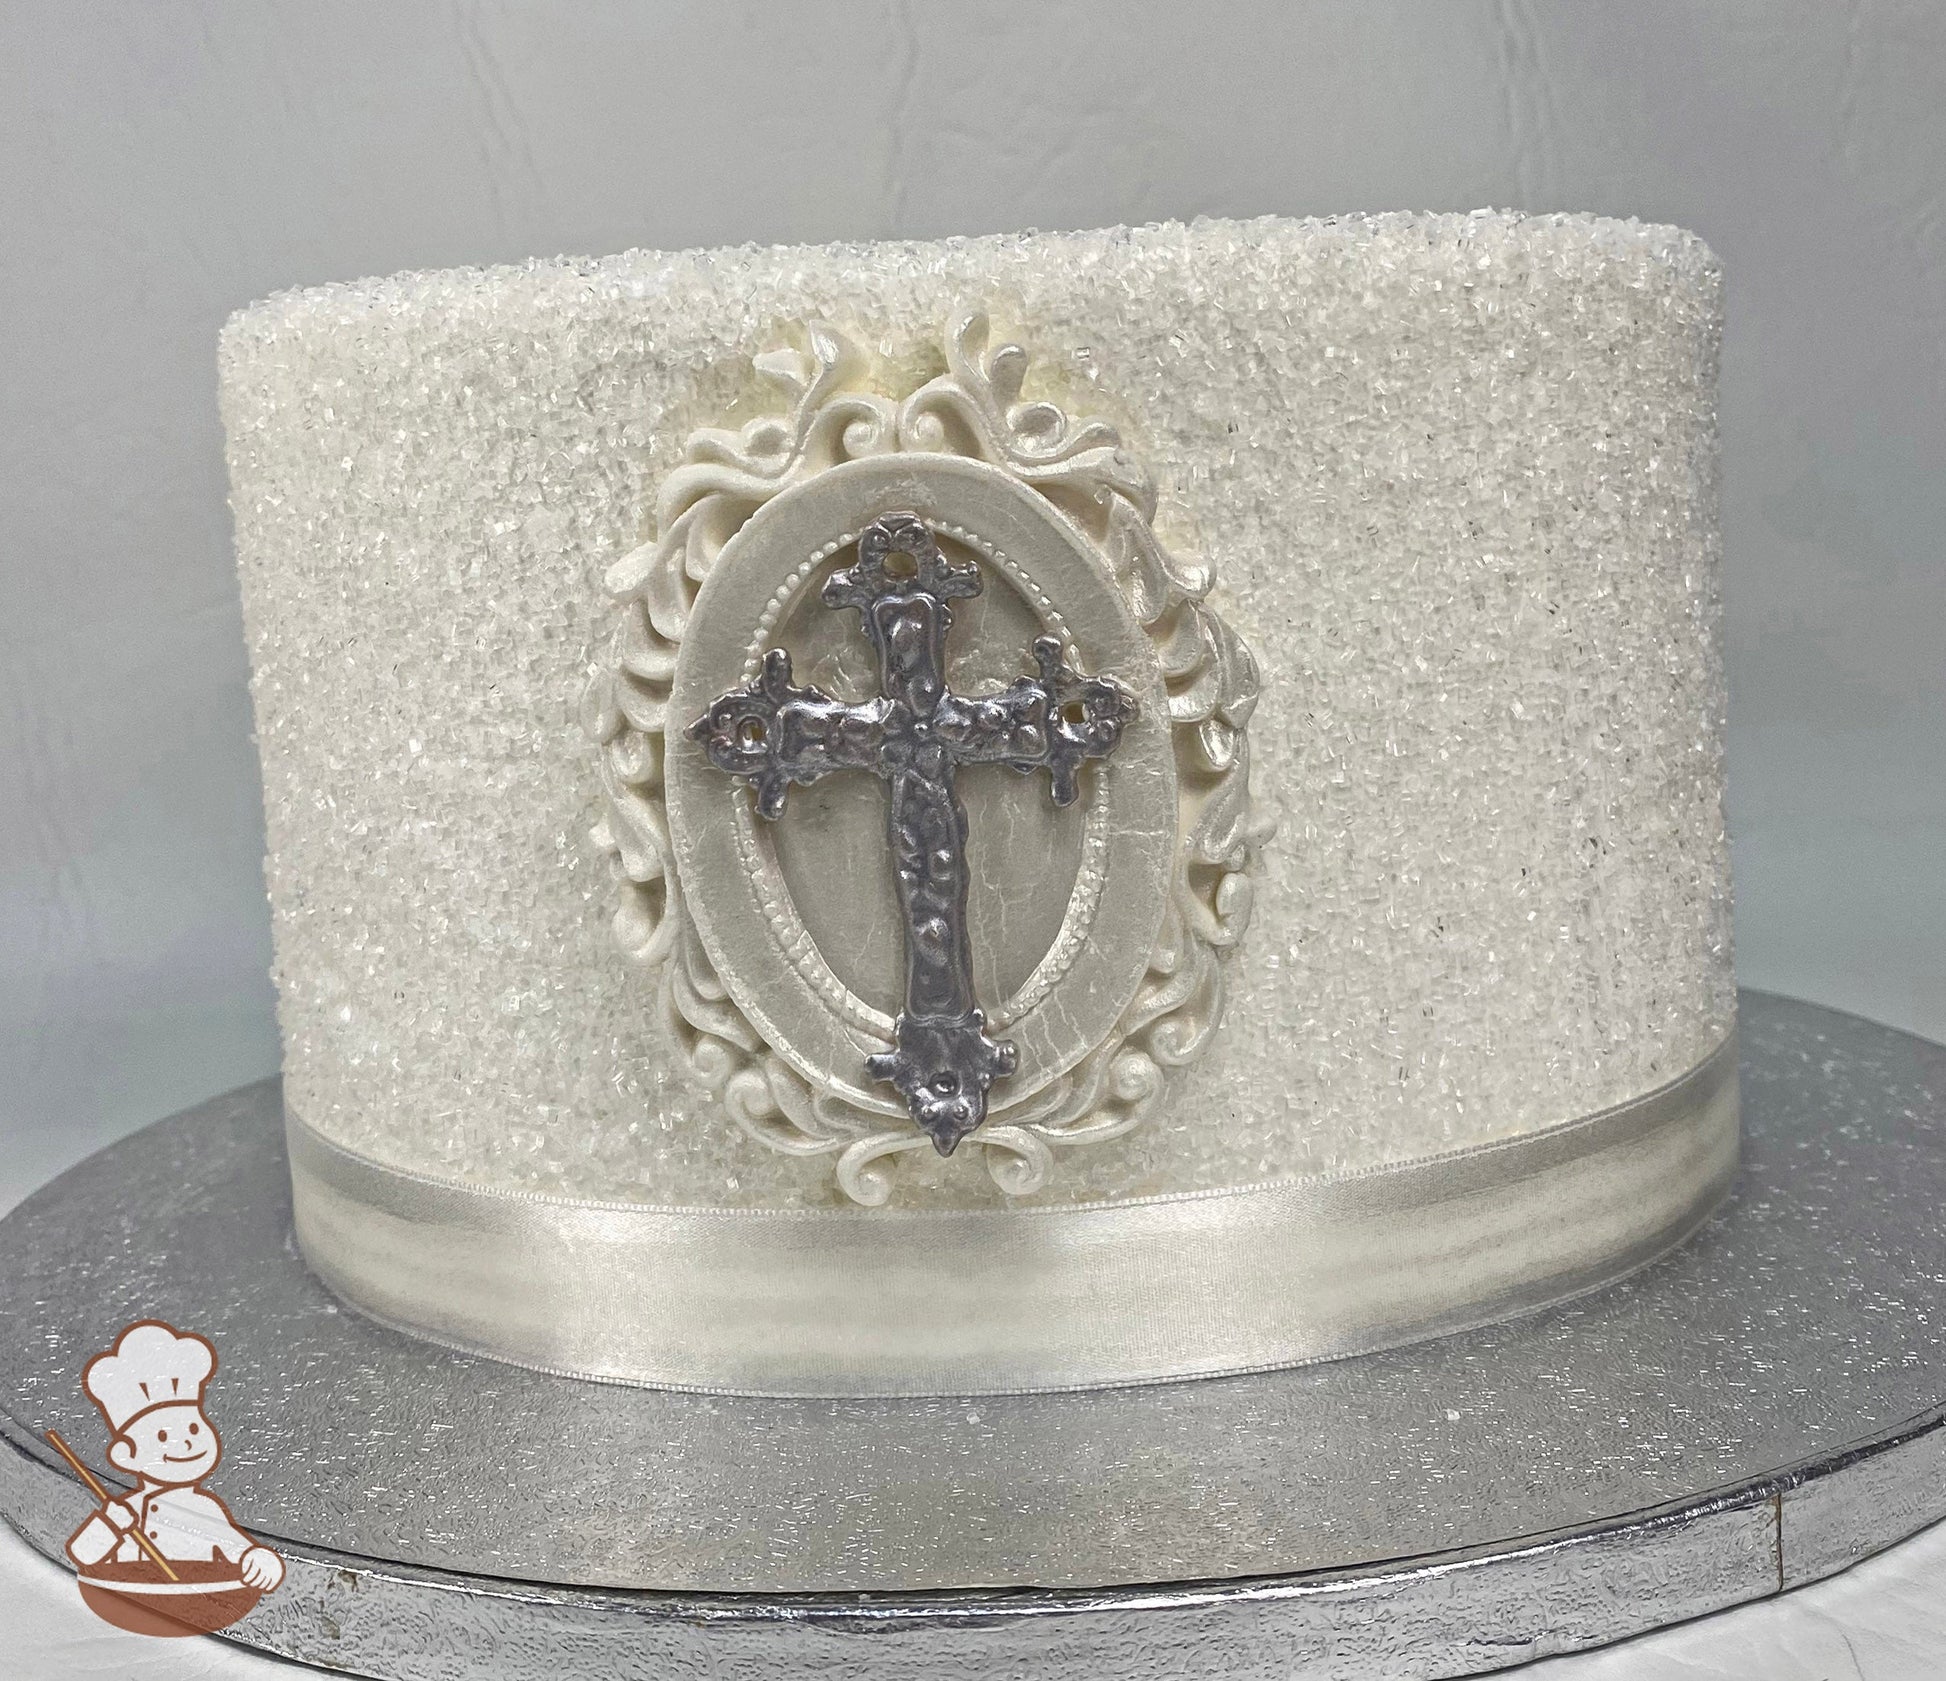 Single tier round cake decorated with white sugar crystal and a silver fondant cross. Lastly, on the base of the cake is a white satin ribbon.